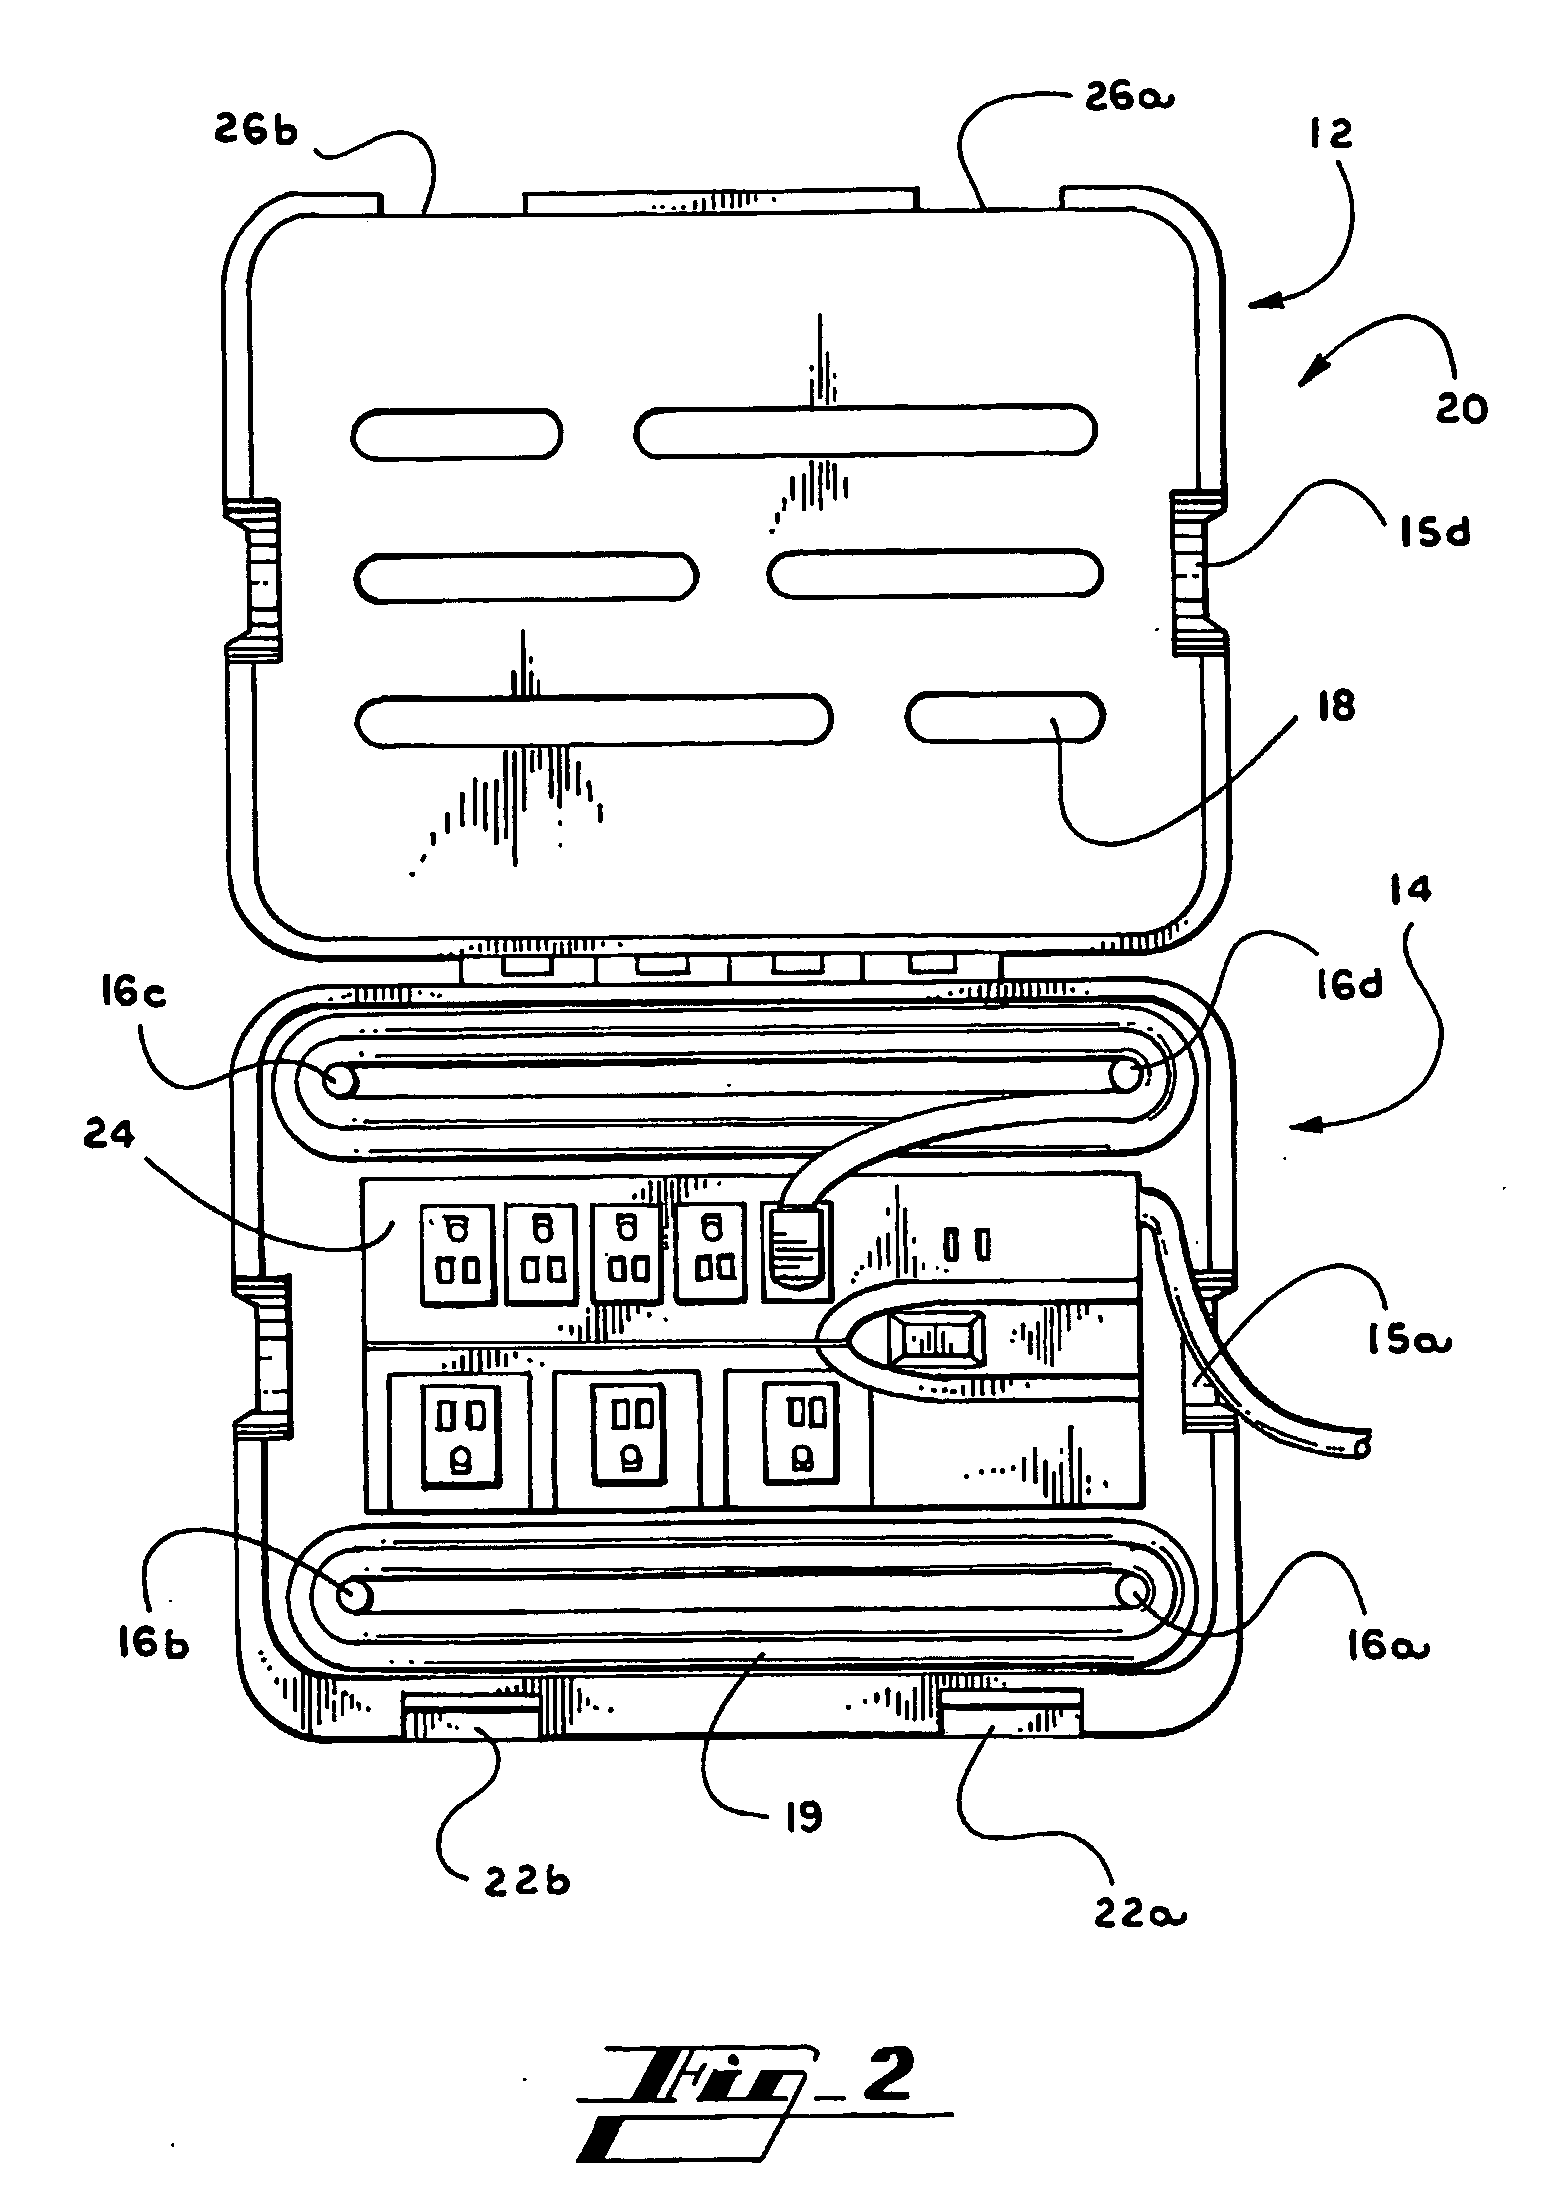 Method and apparatus for storing and protecting conduit